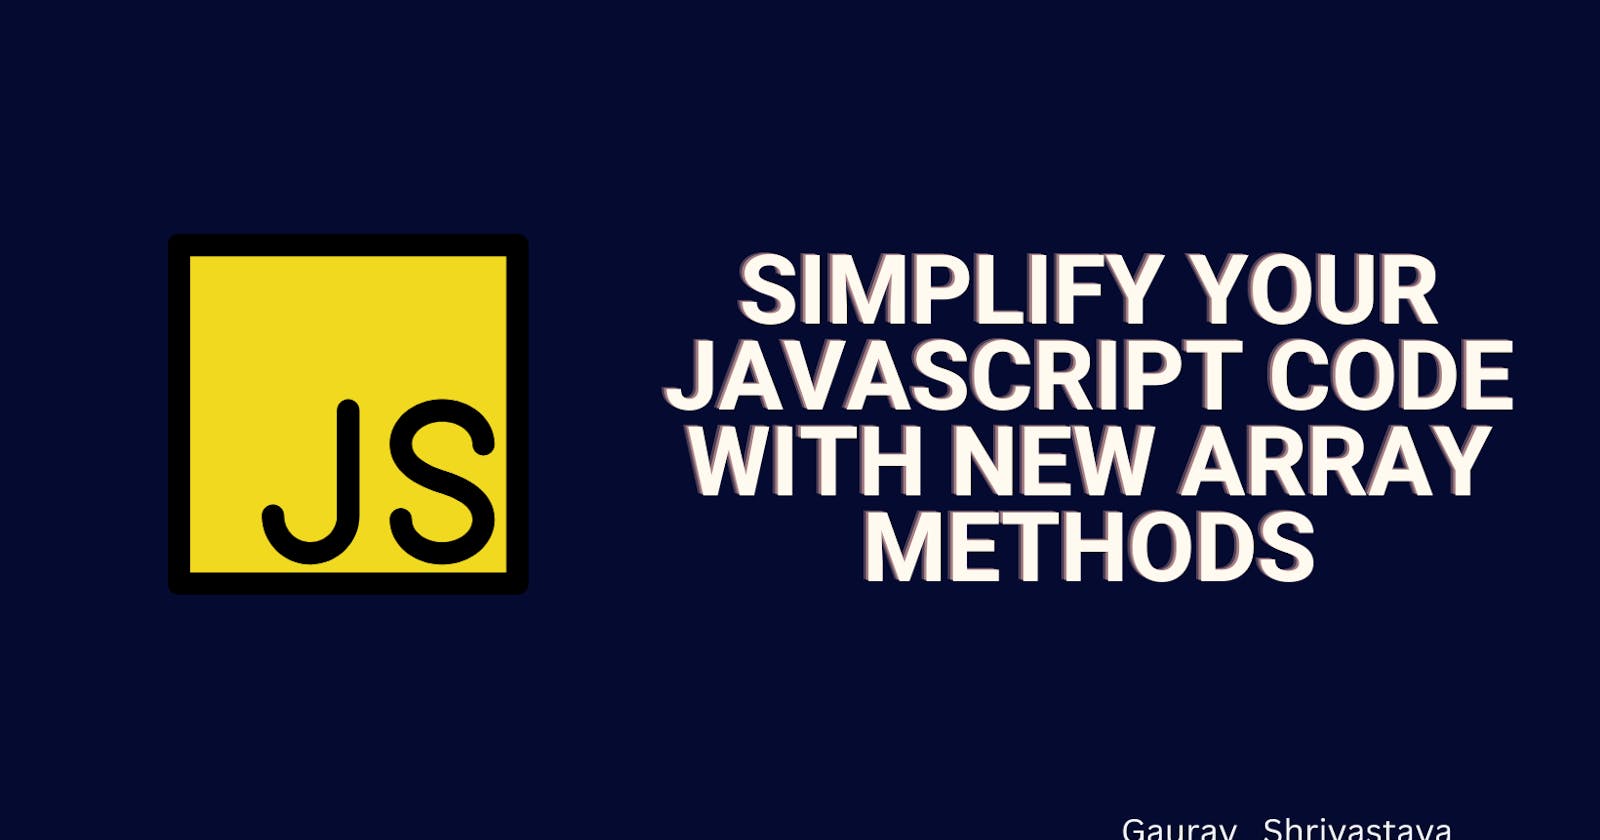 Simplify Your JavaScript Code with New Array Methods